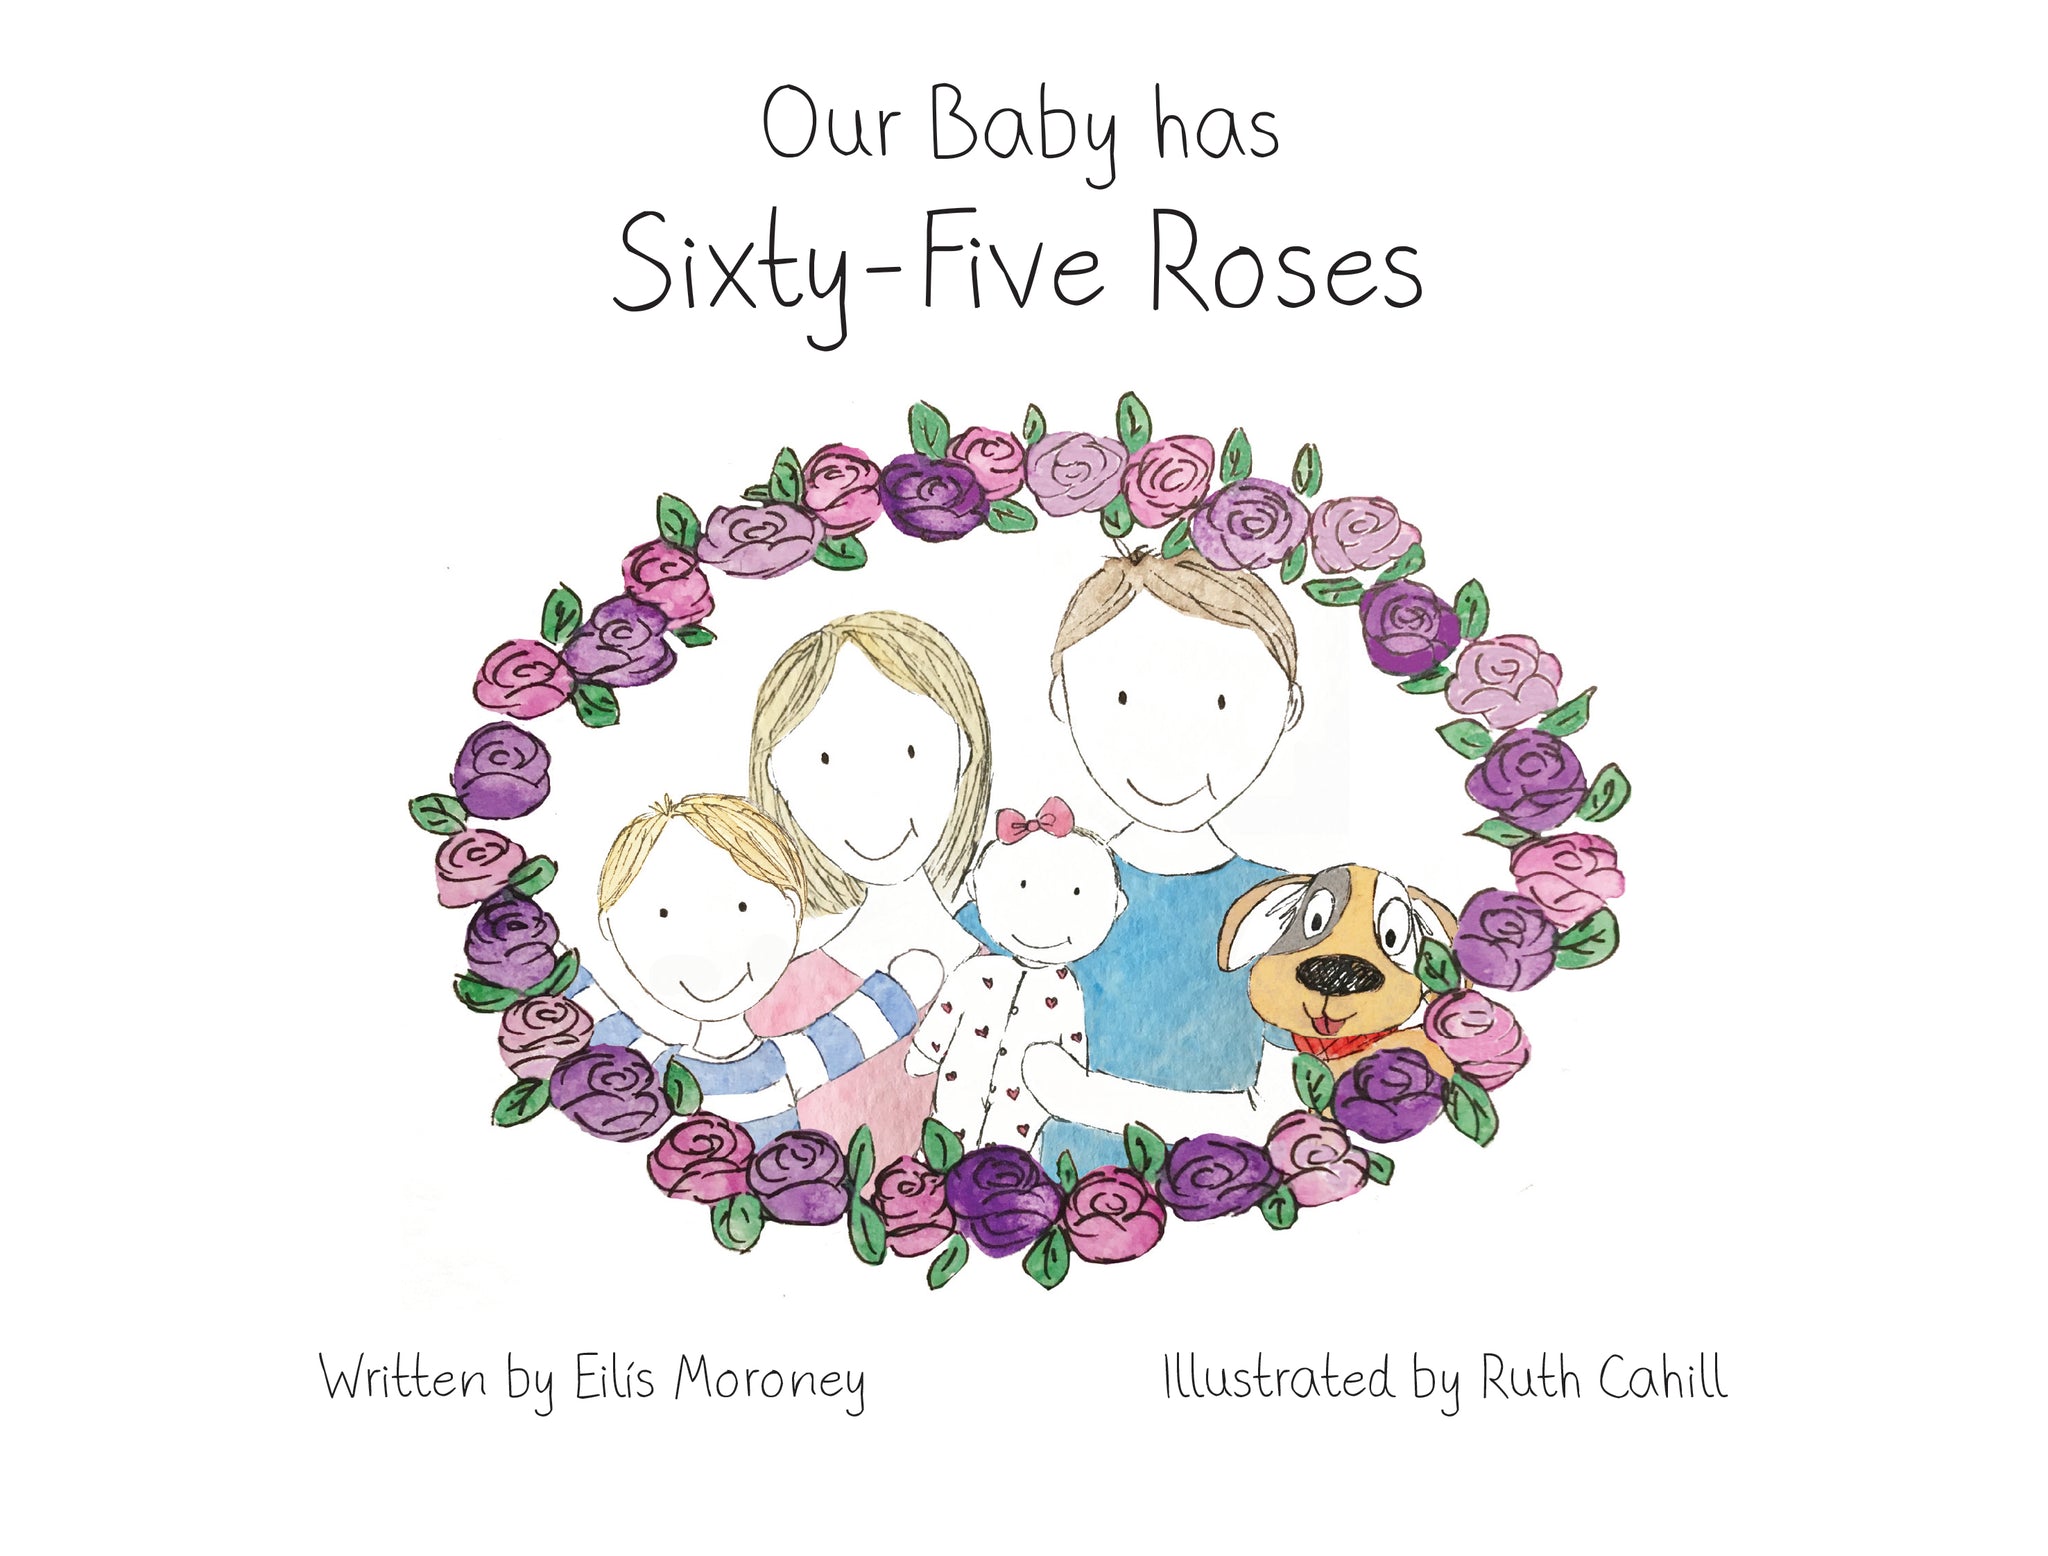 Our Baby has Sixty-Five Roses